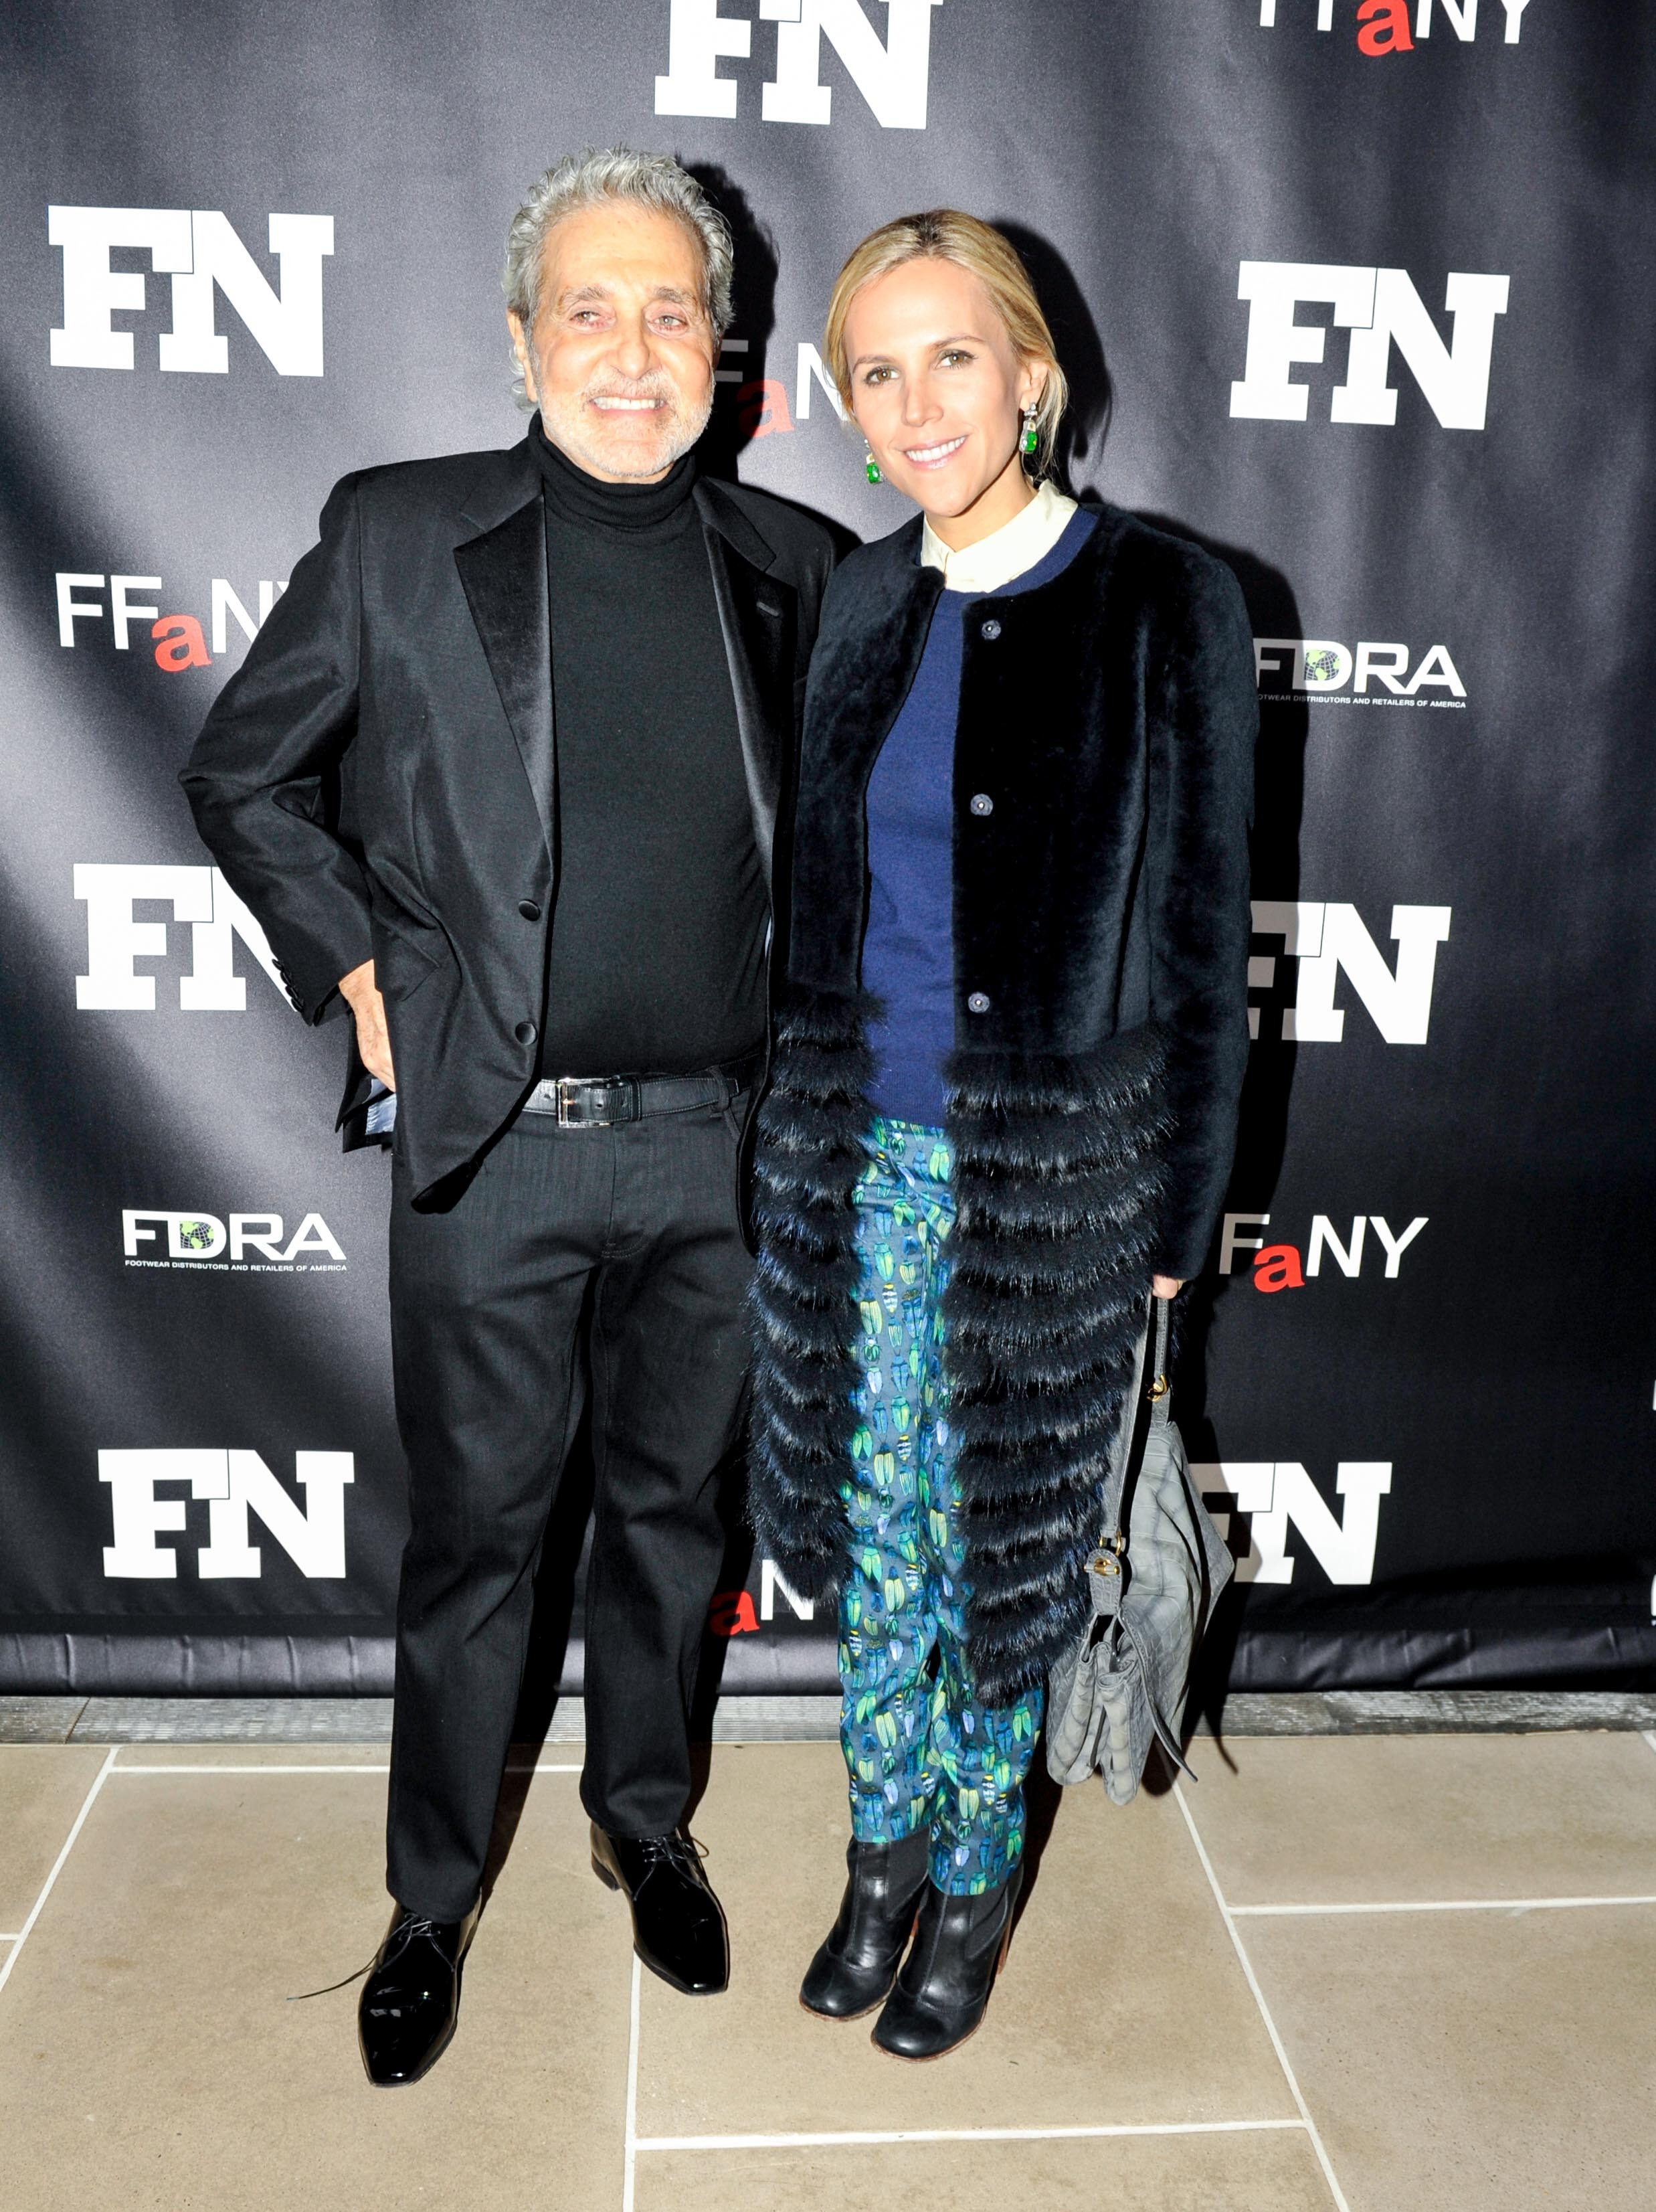 Vince Camuto - Bio, Age, Wiki, Facts and Family - in4fp.com